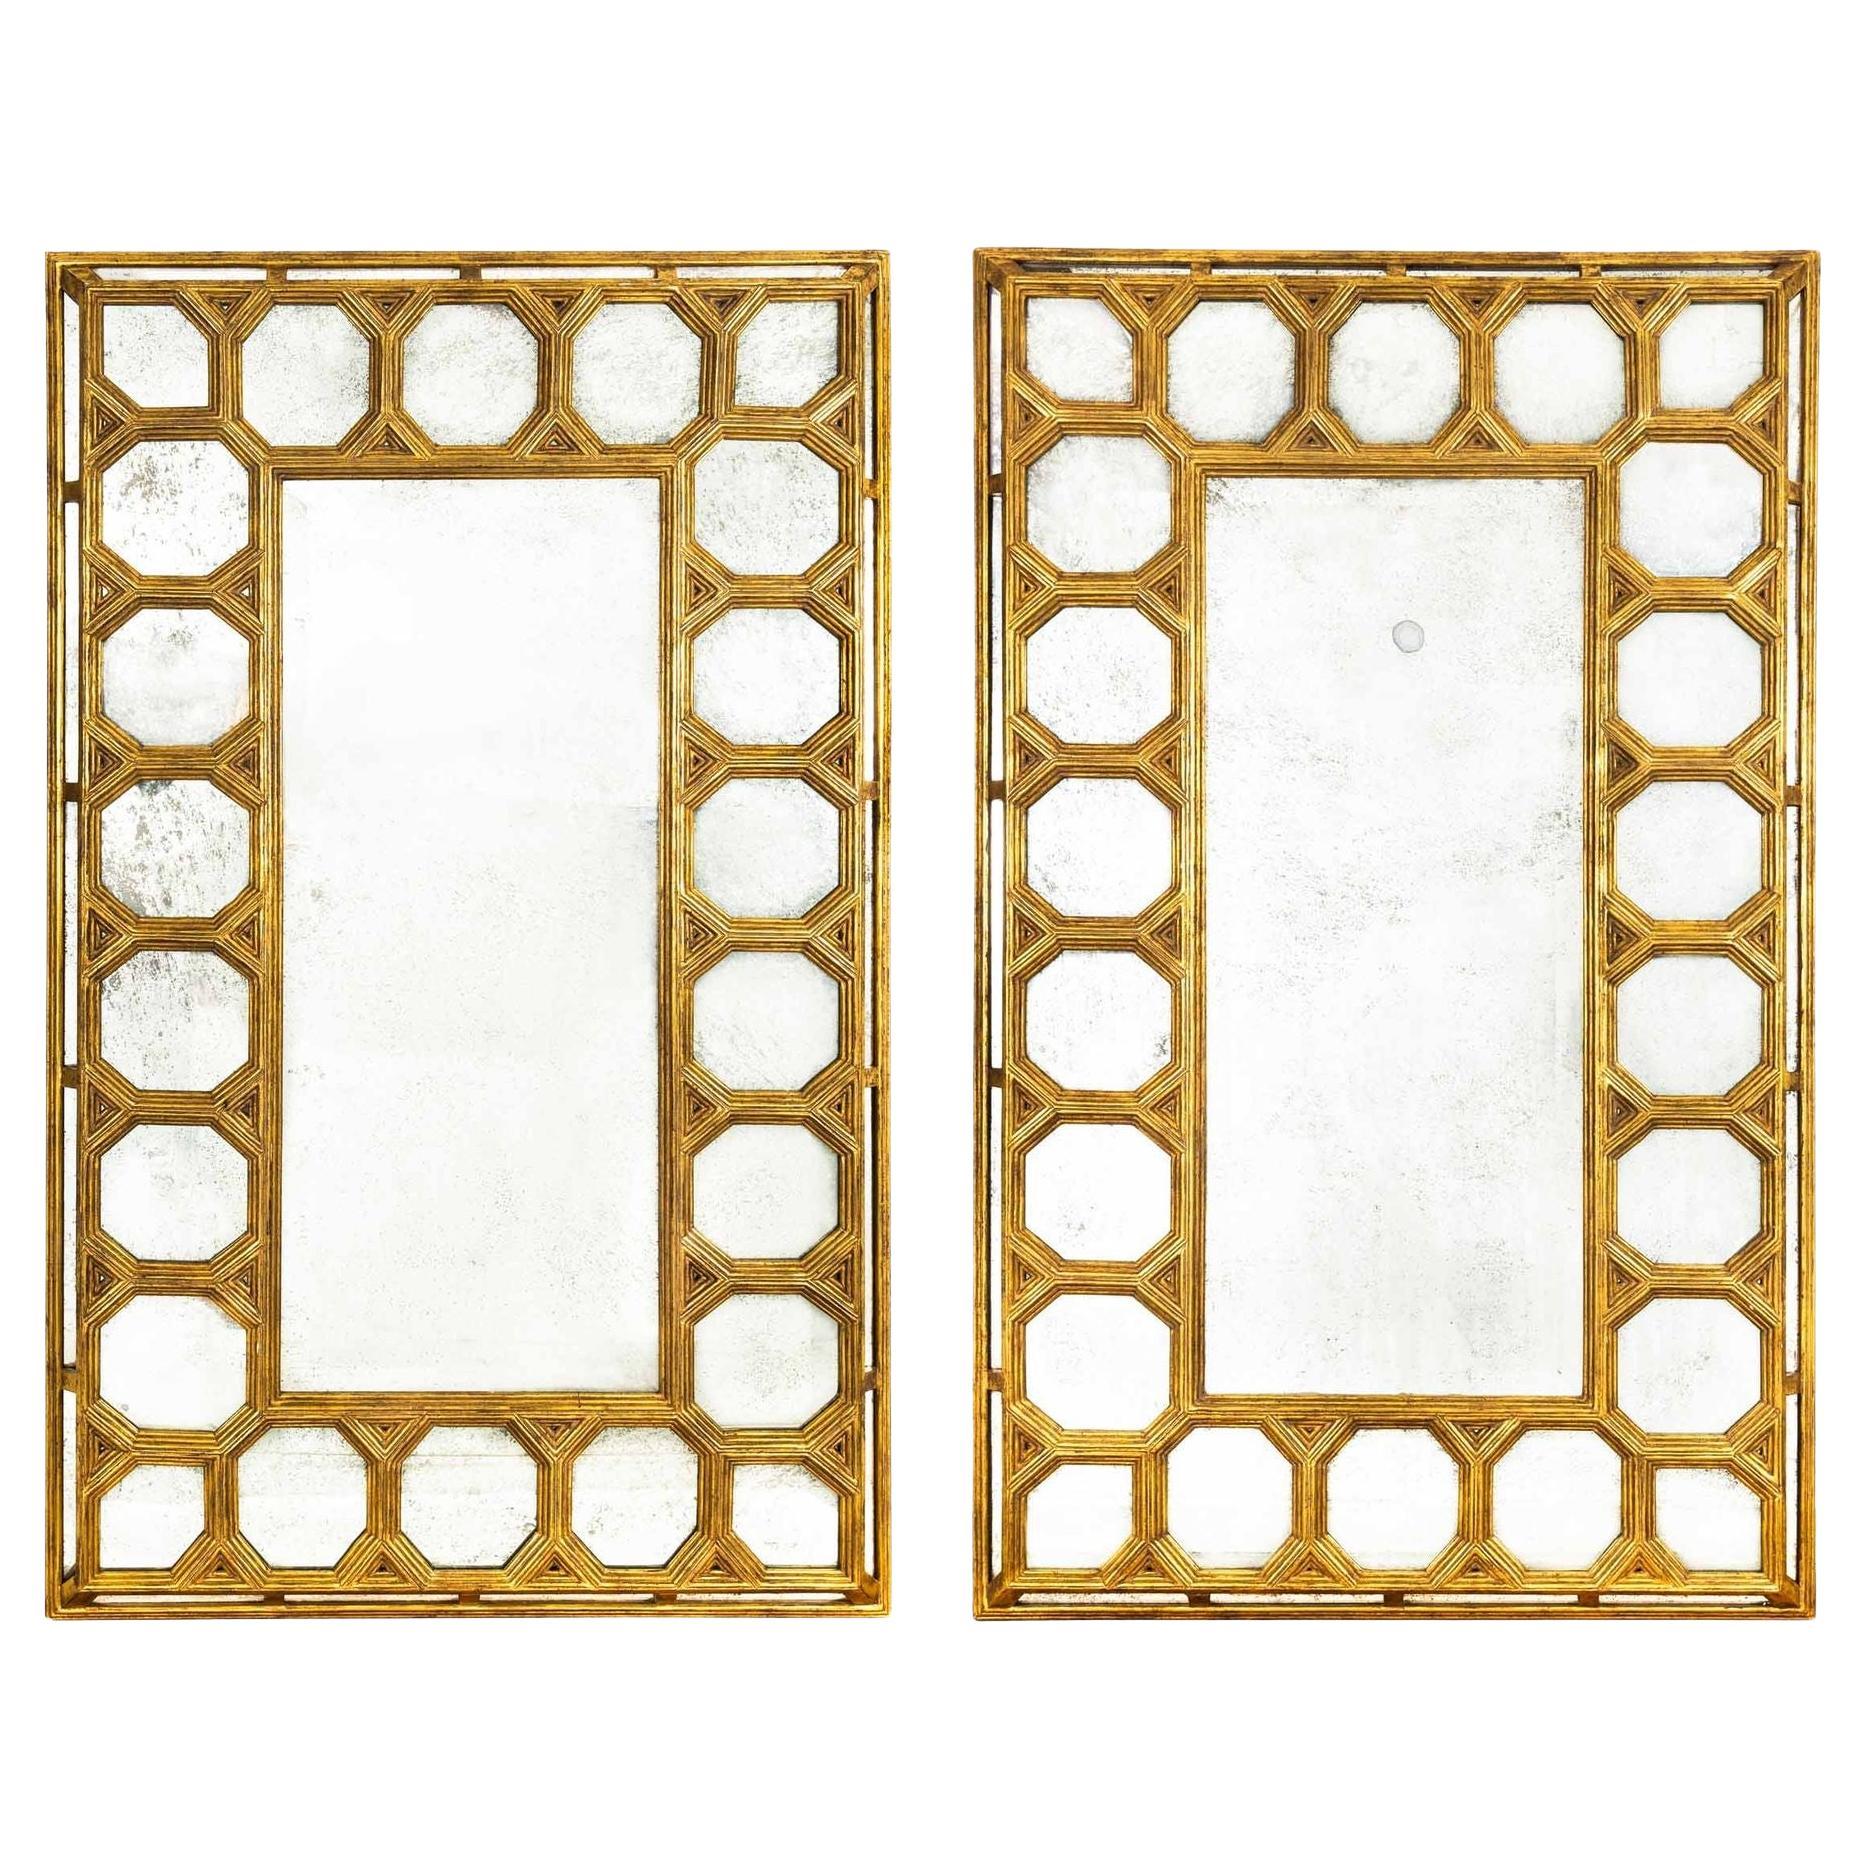 Incredibly Fine Pair Of 22k Giltwood "Graham 607" Mirrors By Dessin Fournir